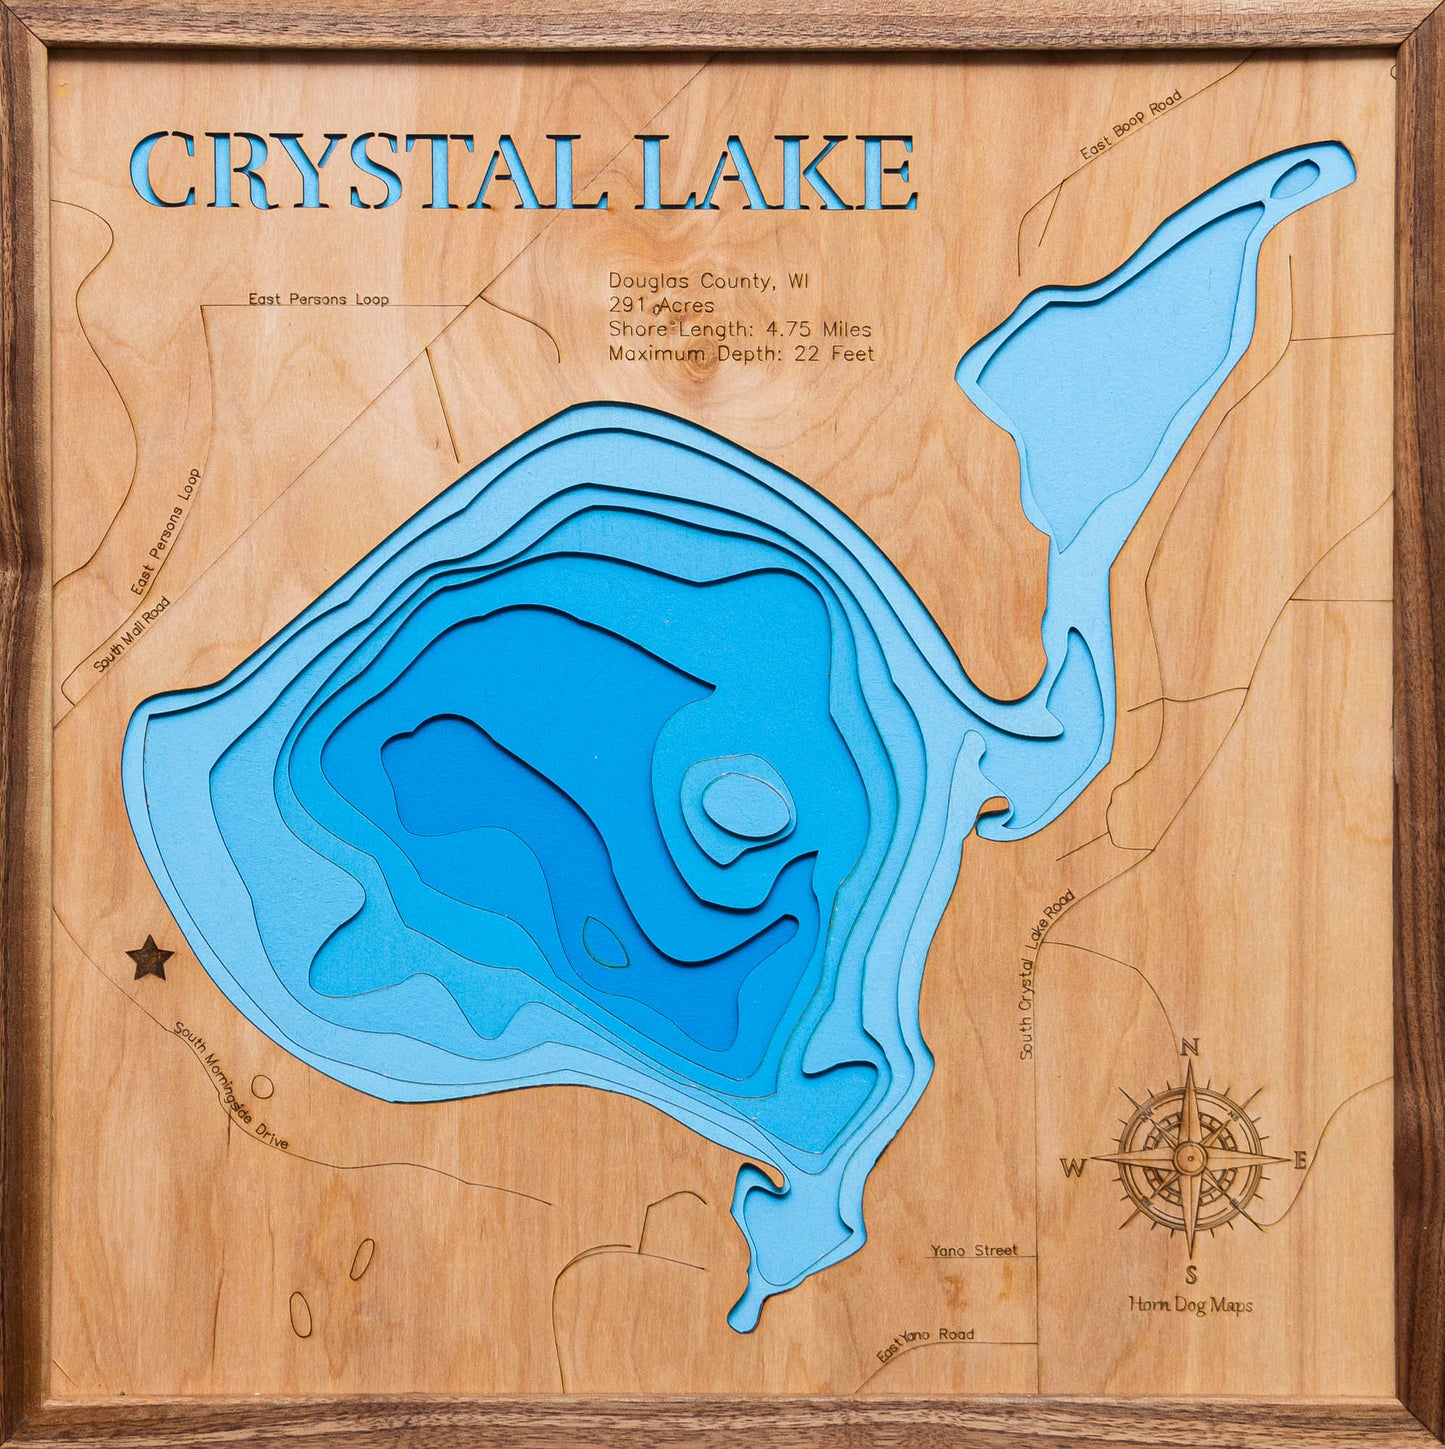 Crystal Lake in Douglas County, WI